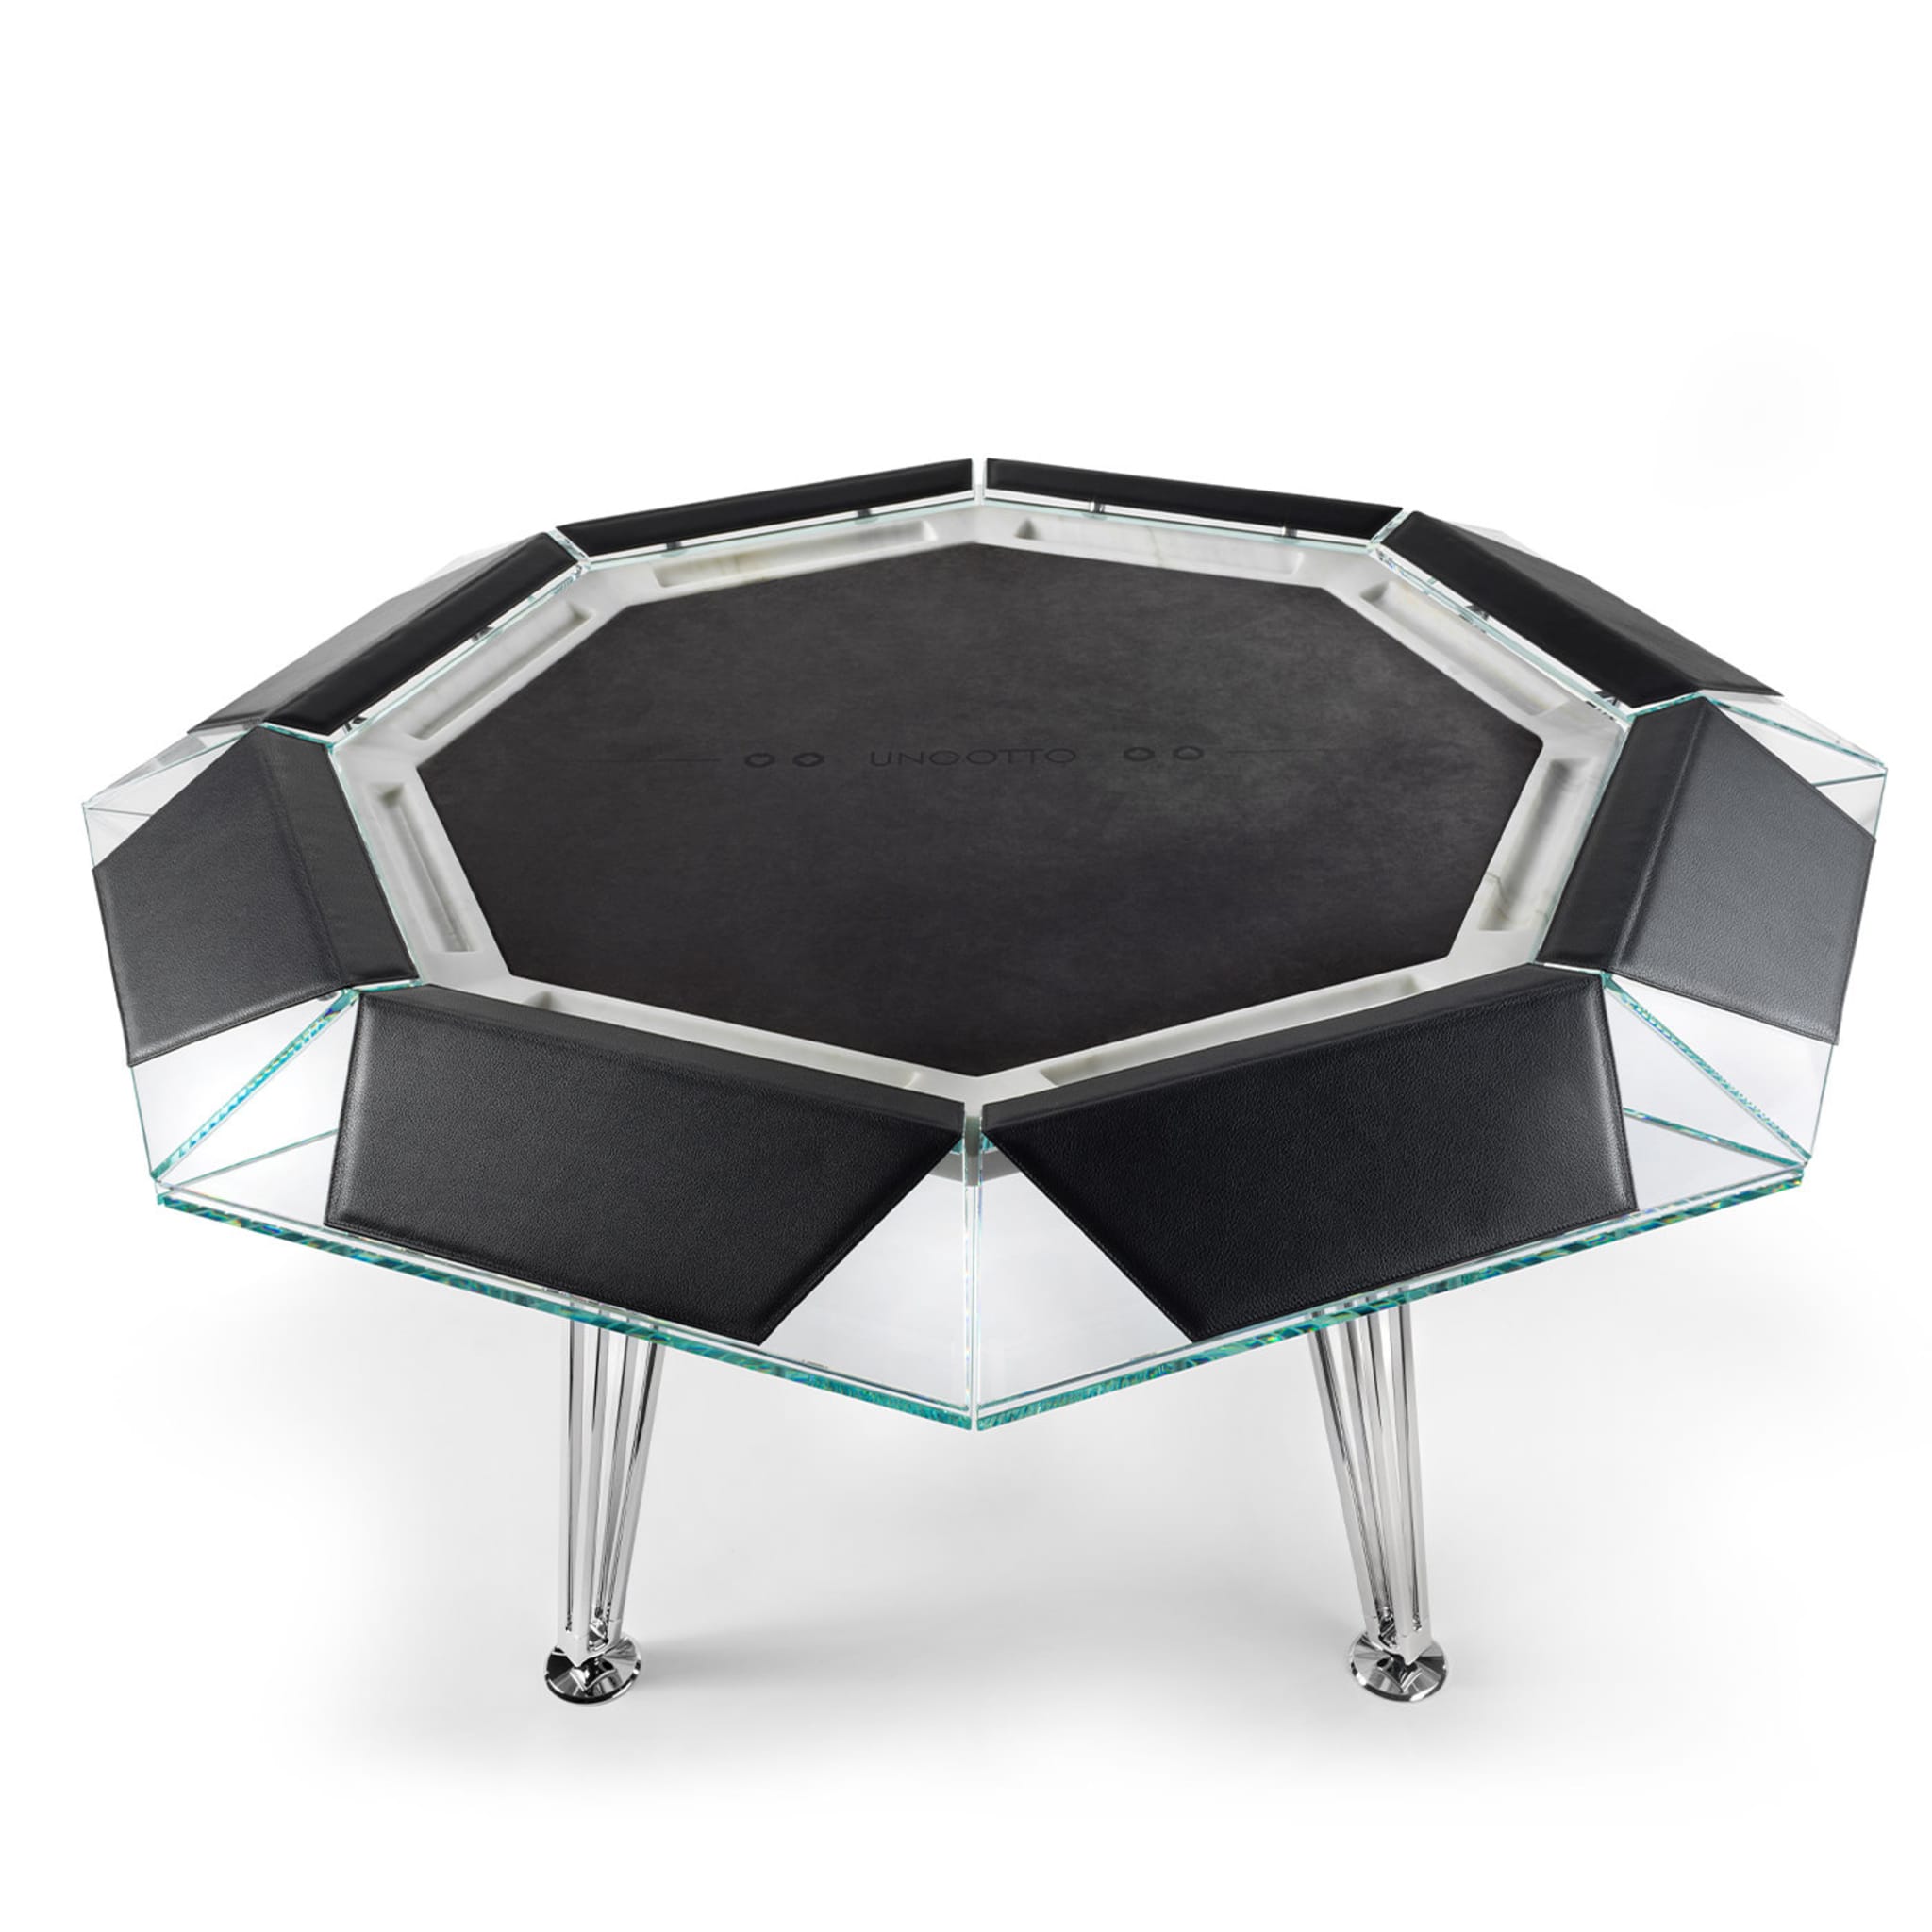 Unootto 8 Player Marble Edition Poker Table - Alternative view 1